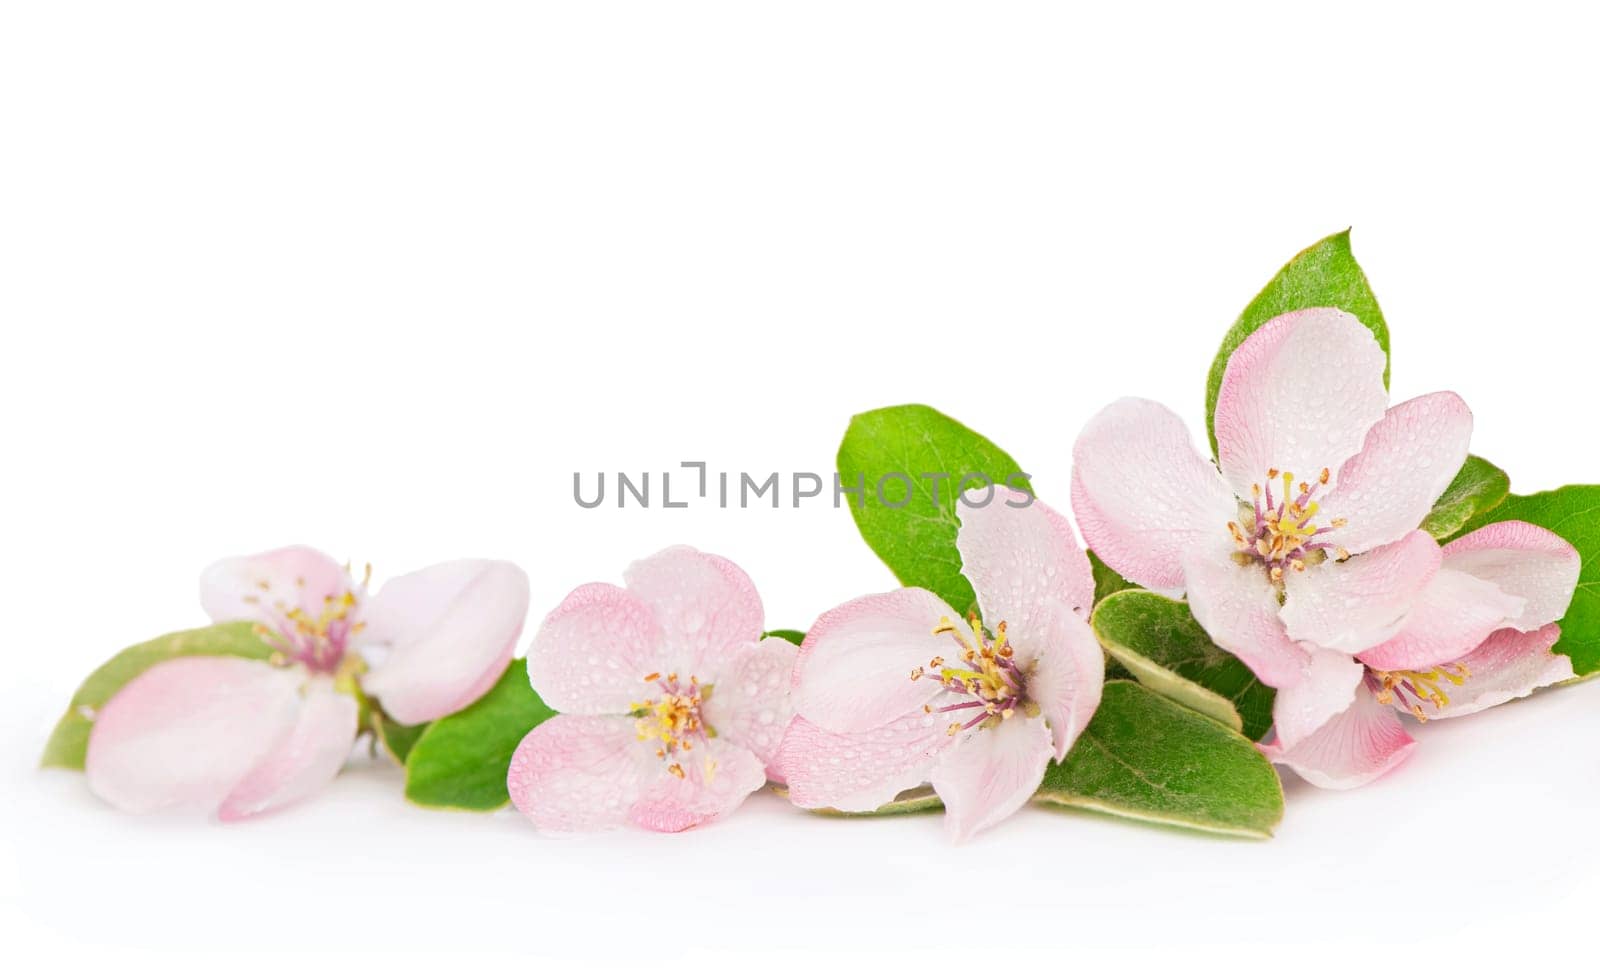 apple tree blossoms with green leaves isolated on white background by aprilphoto